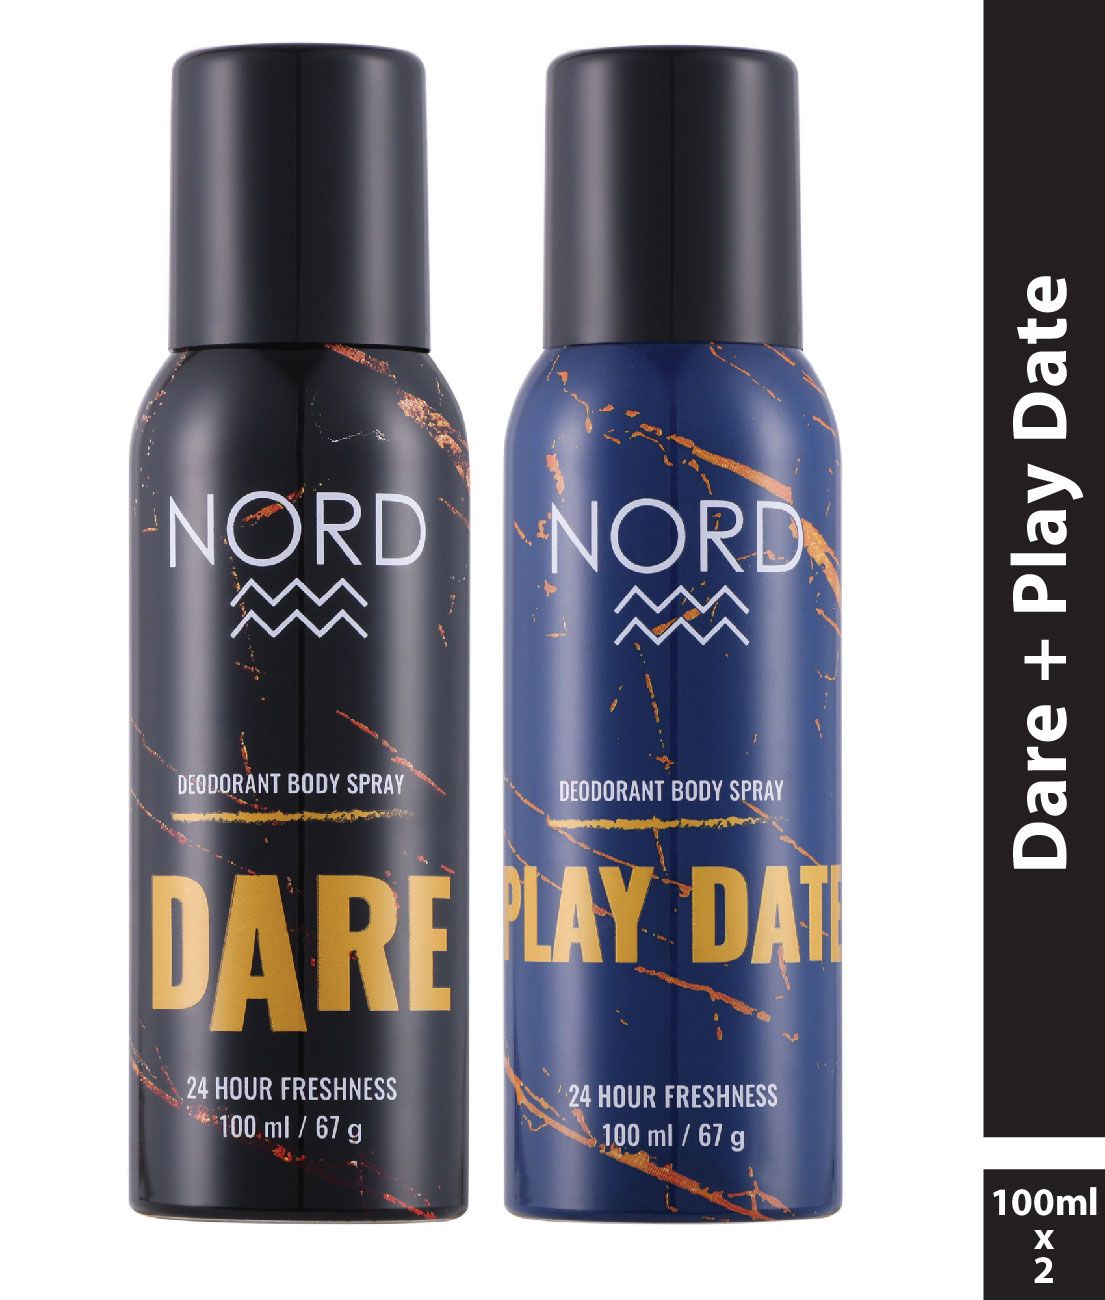     			NORD Dare and Play date Deodorant Spray for Men 100ml Each (Pack of 2)